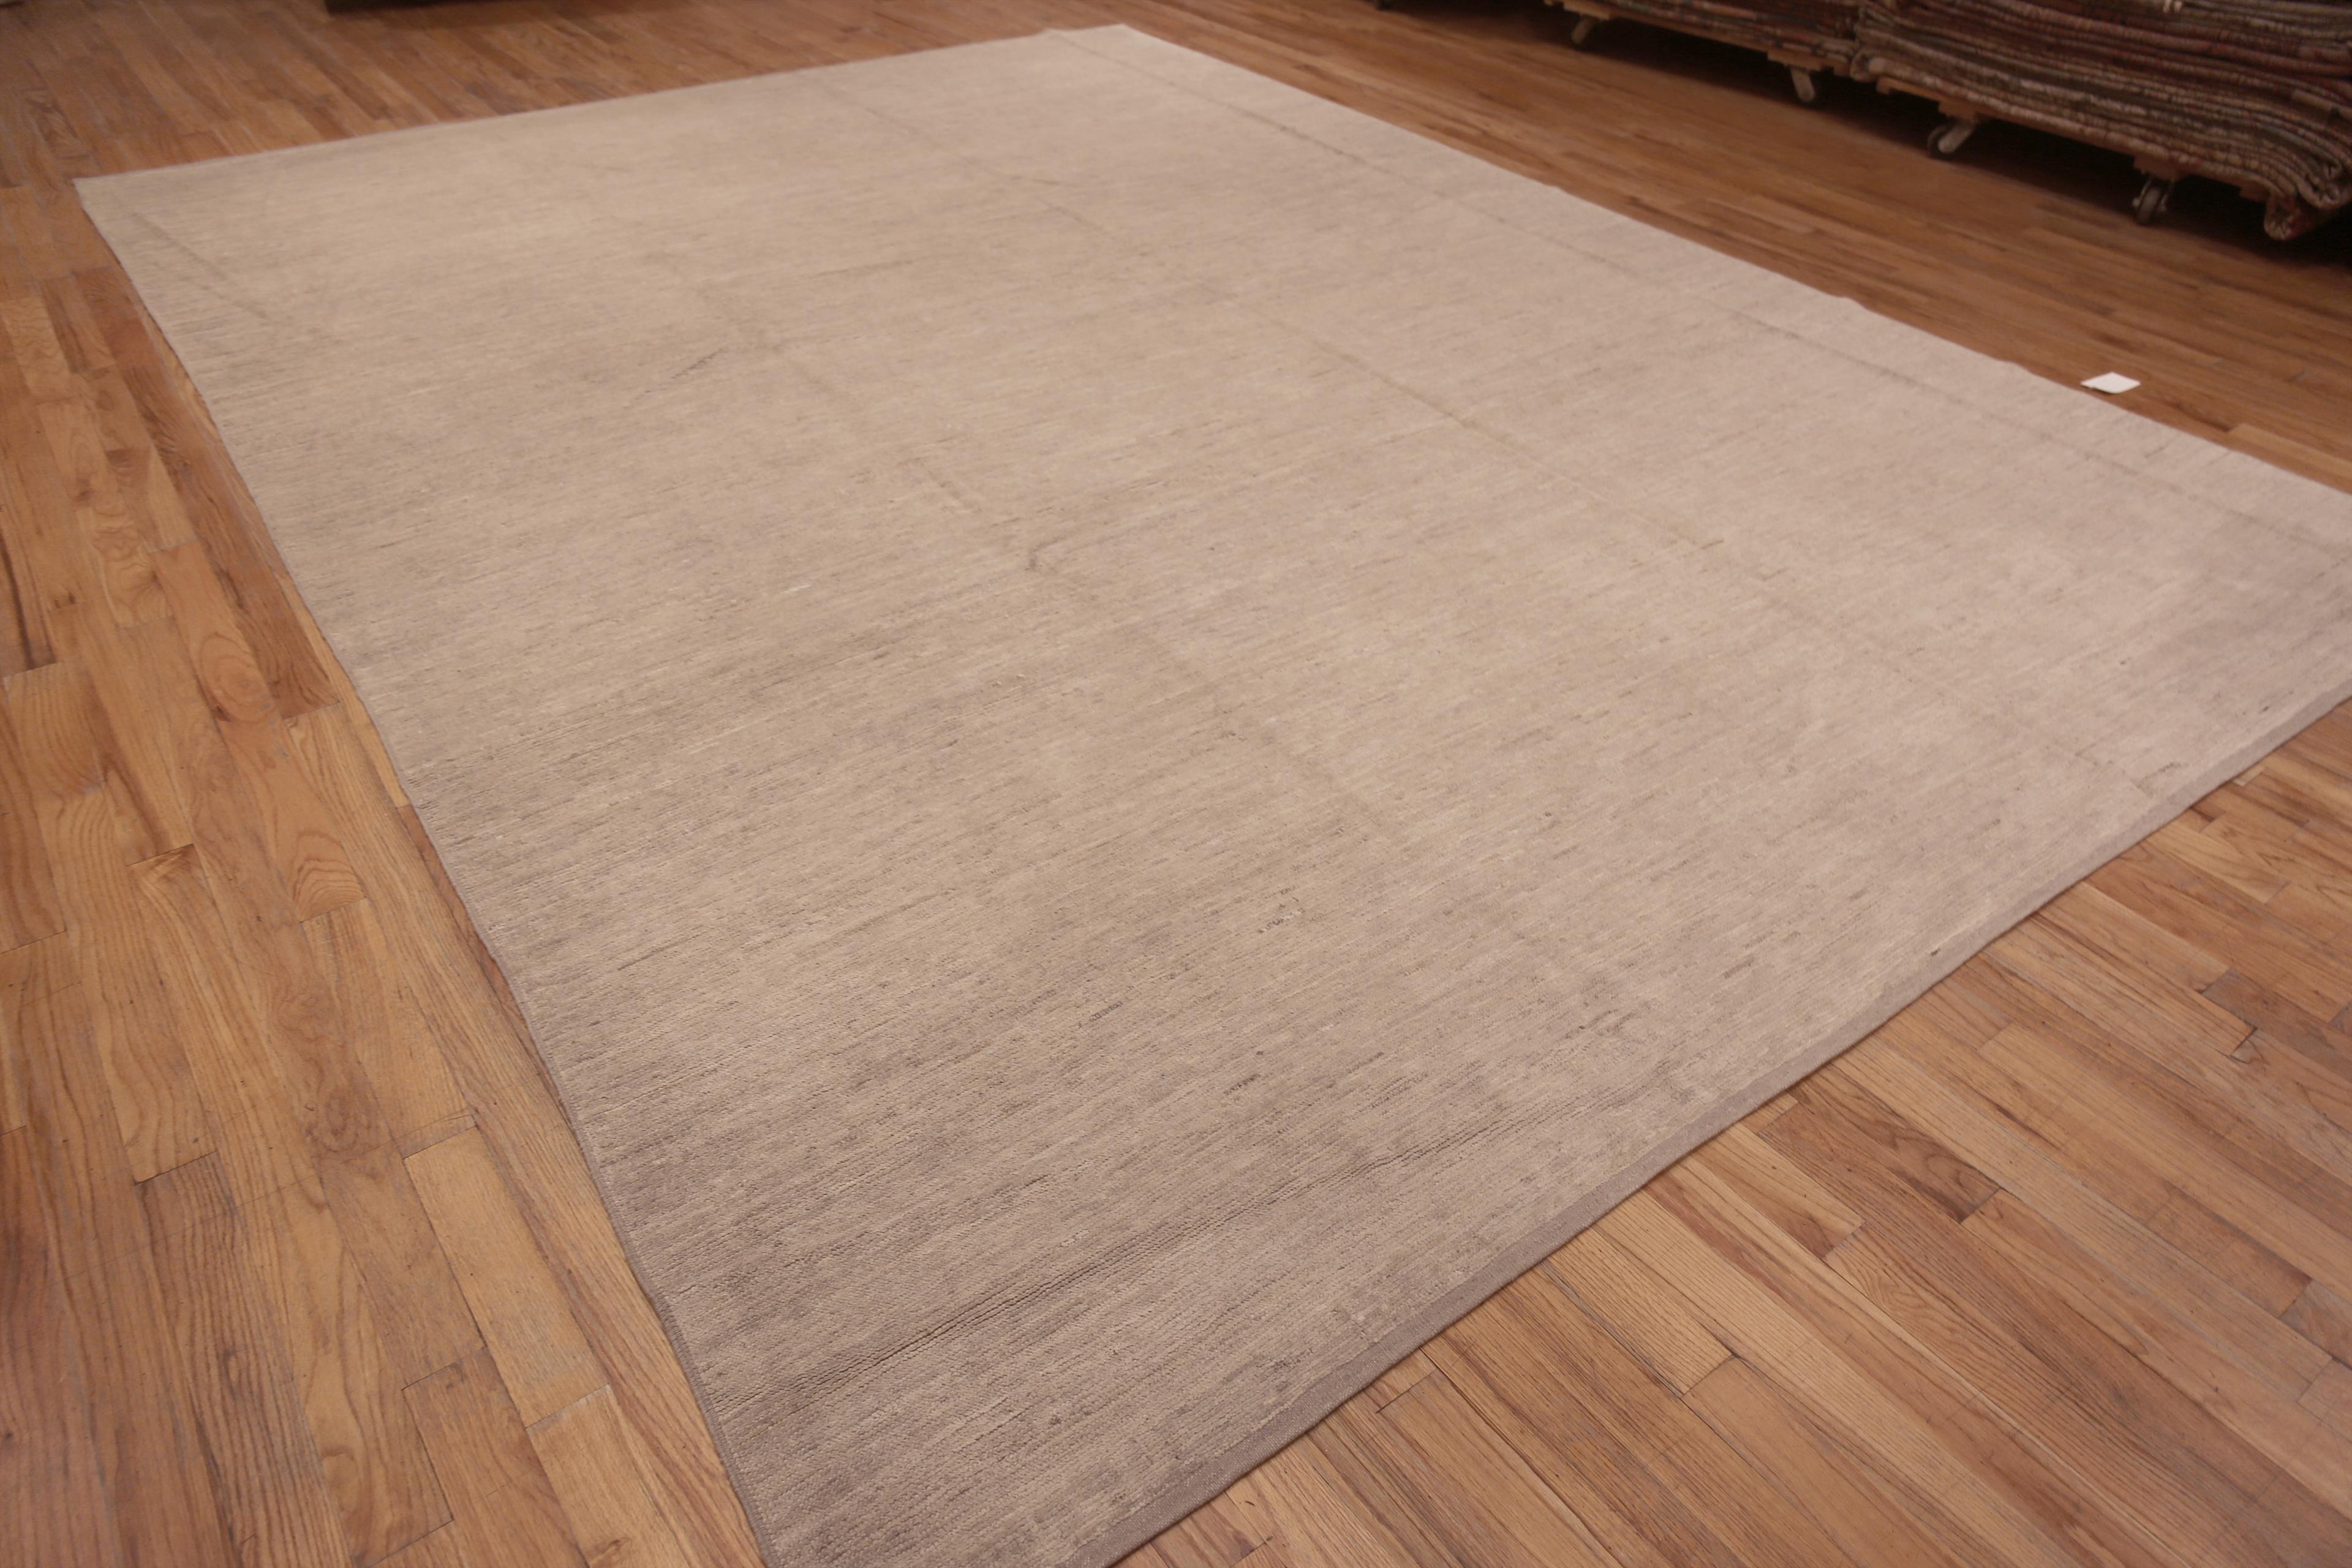 Beautifully Decorative Abstract Solid Minimalist Cream Color Modern Room Size Area Rug, Country Of Origin: Central Asia, Circa Date: Modern Rug